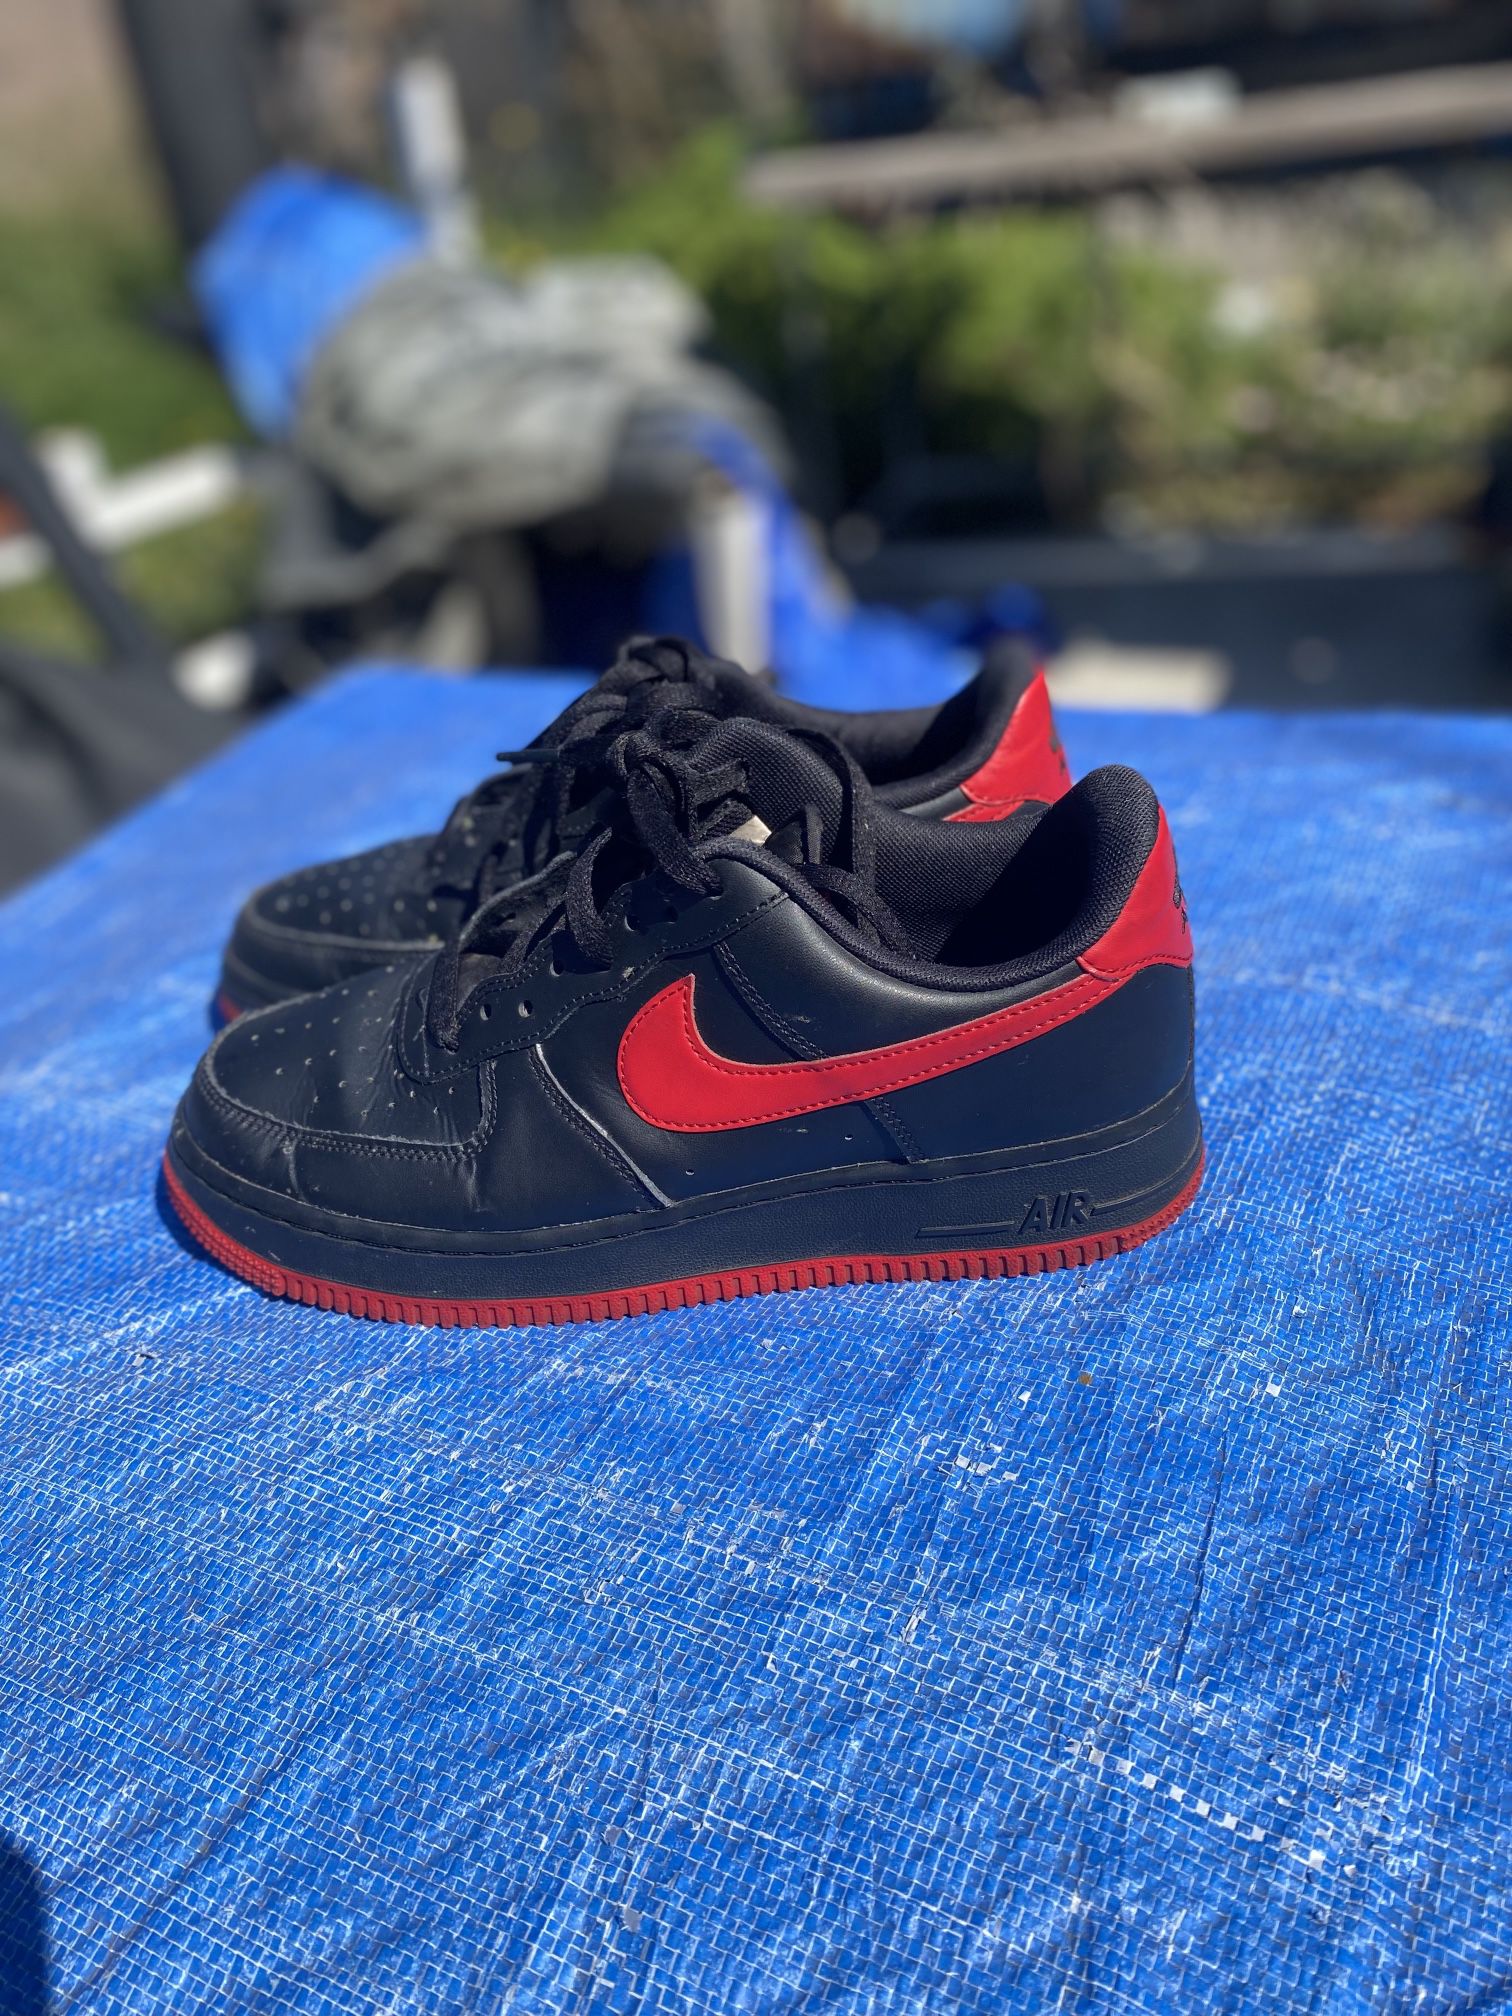 Nike Air Force 1 '07 LVL 8 for Sale in Hammond, IN - OfferUp